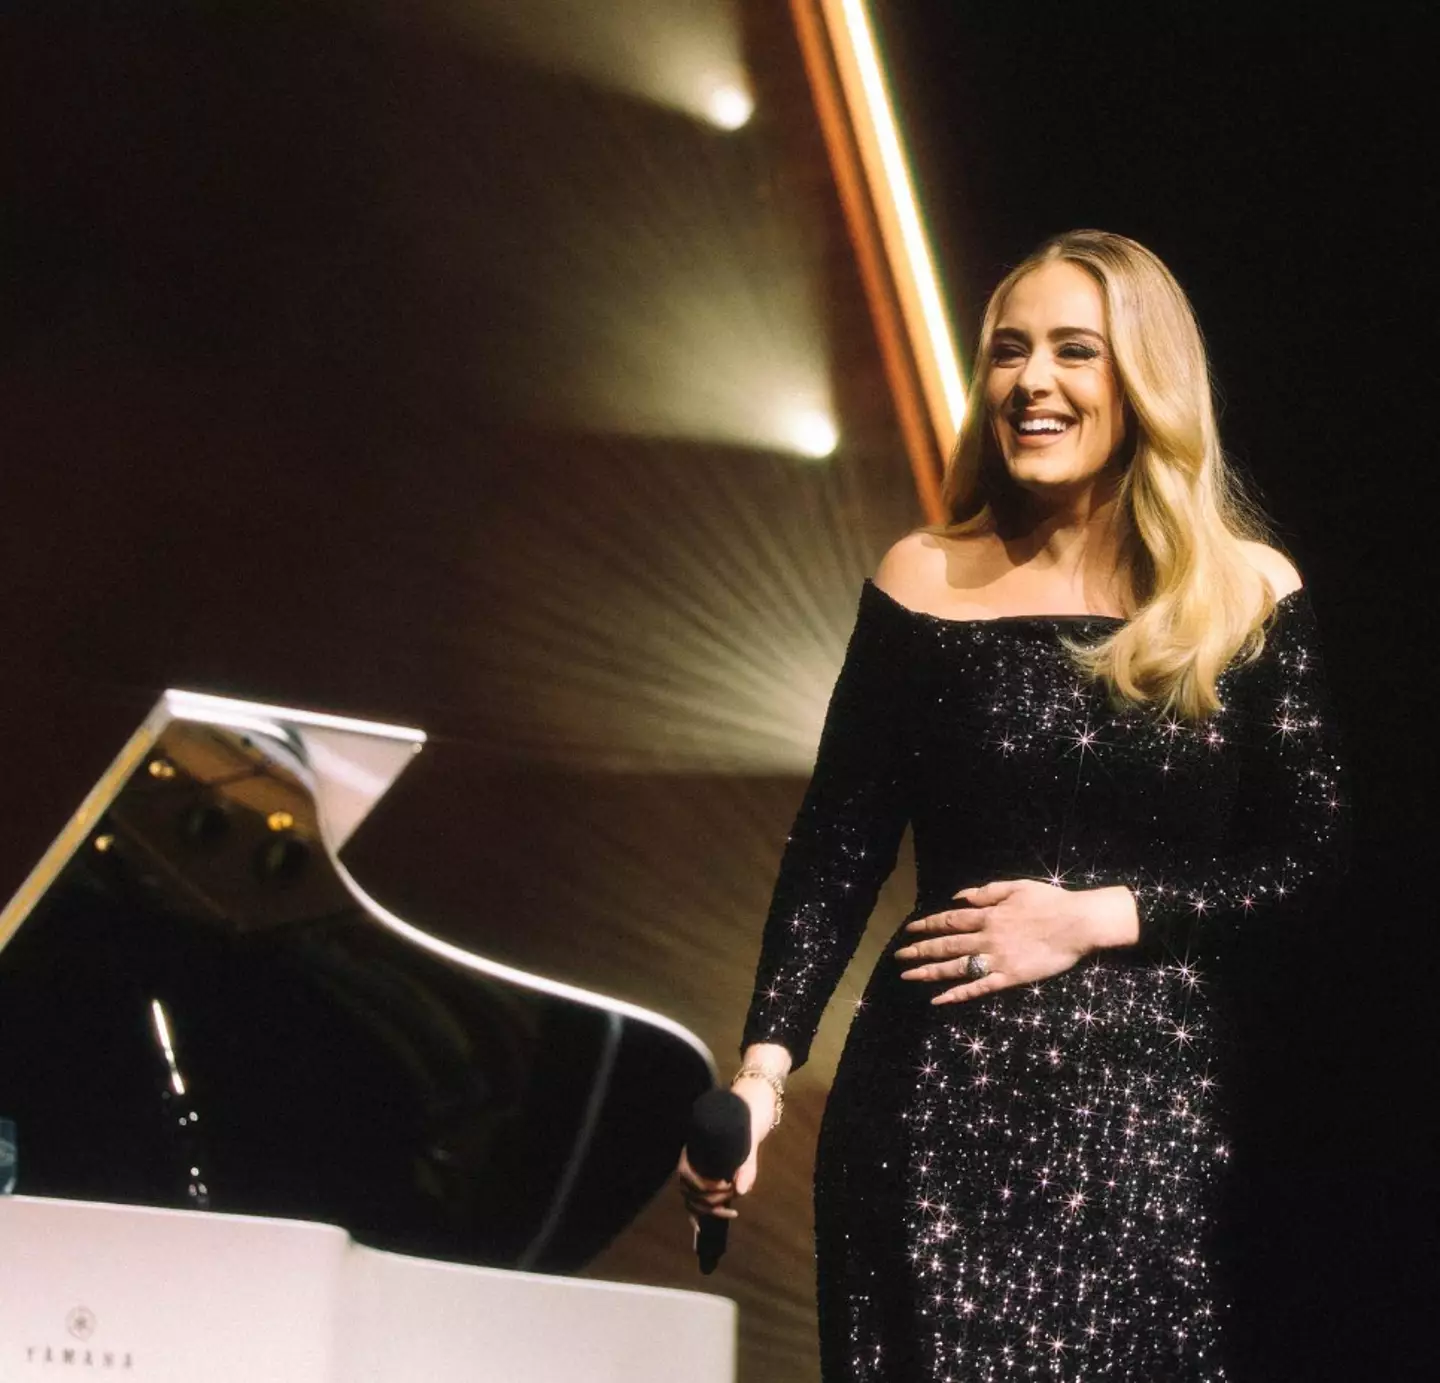 VIP tickets to Adele in Vegas cost life-changing money.